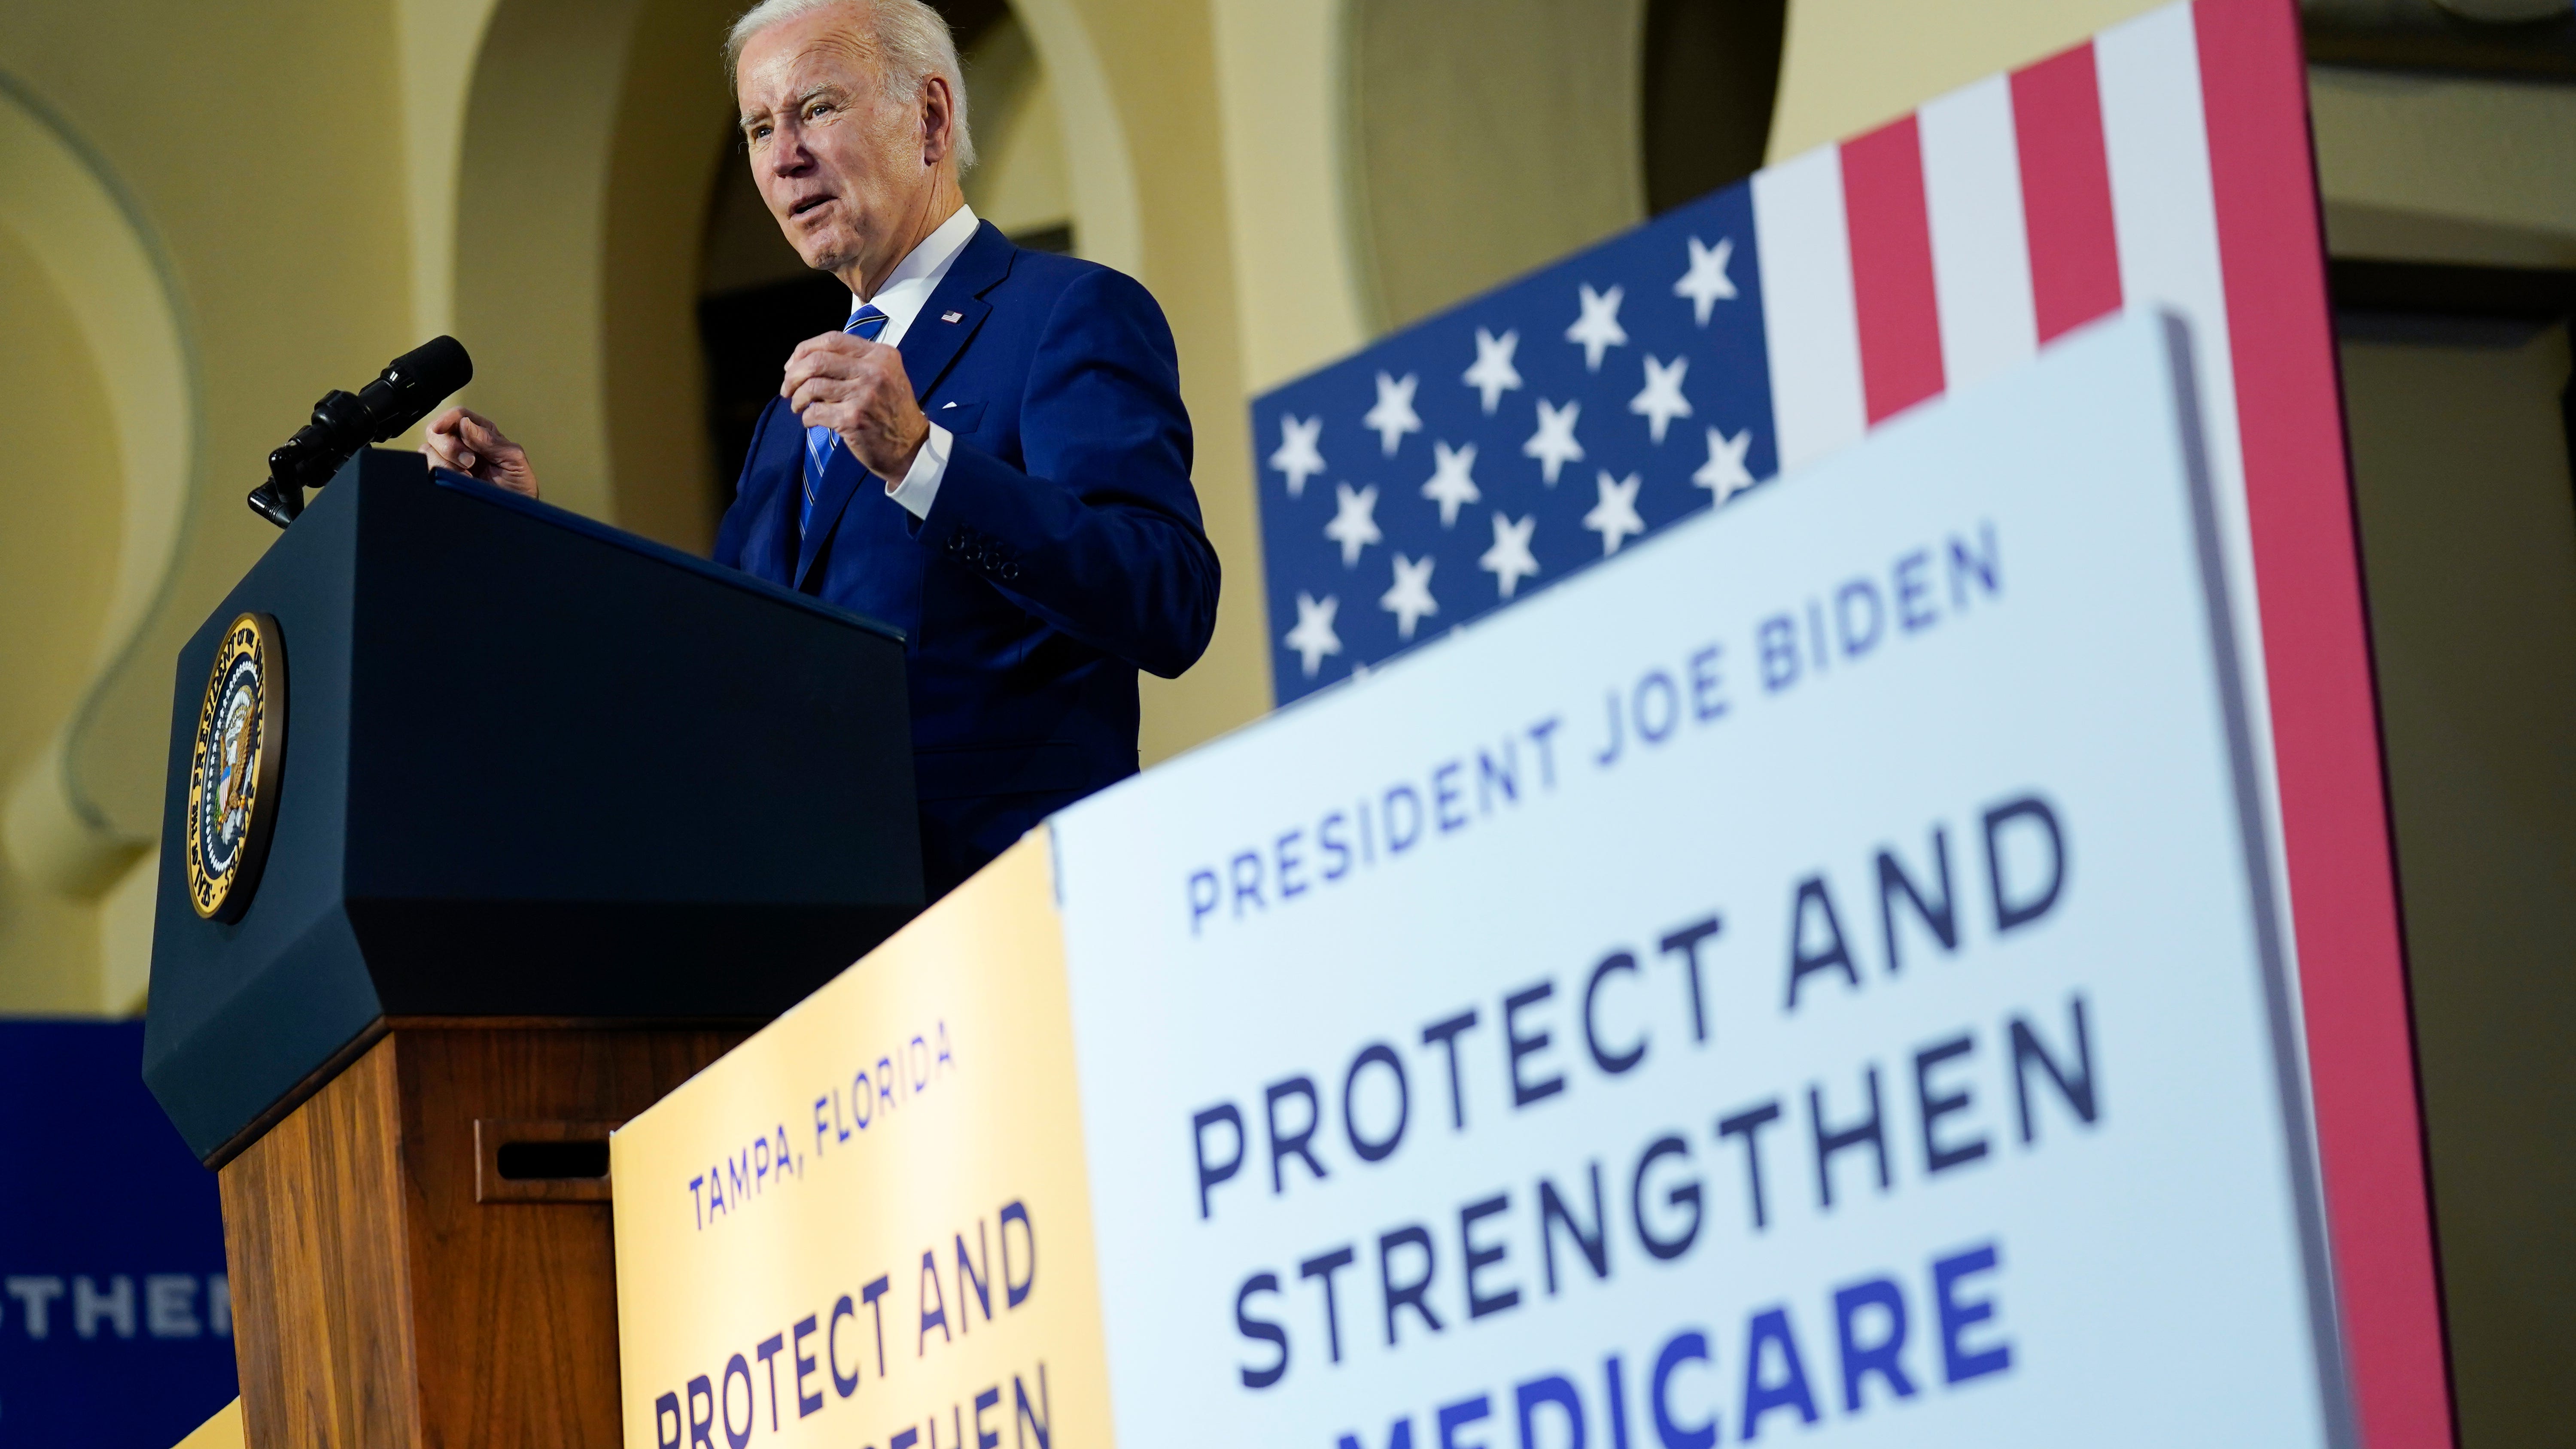 President Joe Biden speaks about his administration's plans to protect Social Security and Medicare and lower healthcare costs, Feb. 9, 2023, at the University of Tampa in Tampa, Florida.